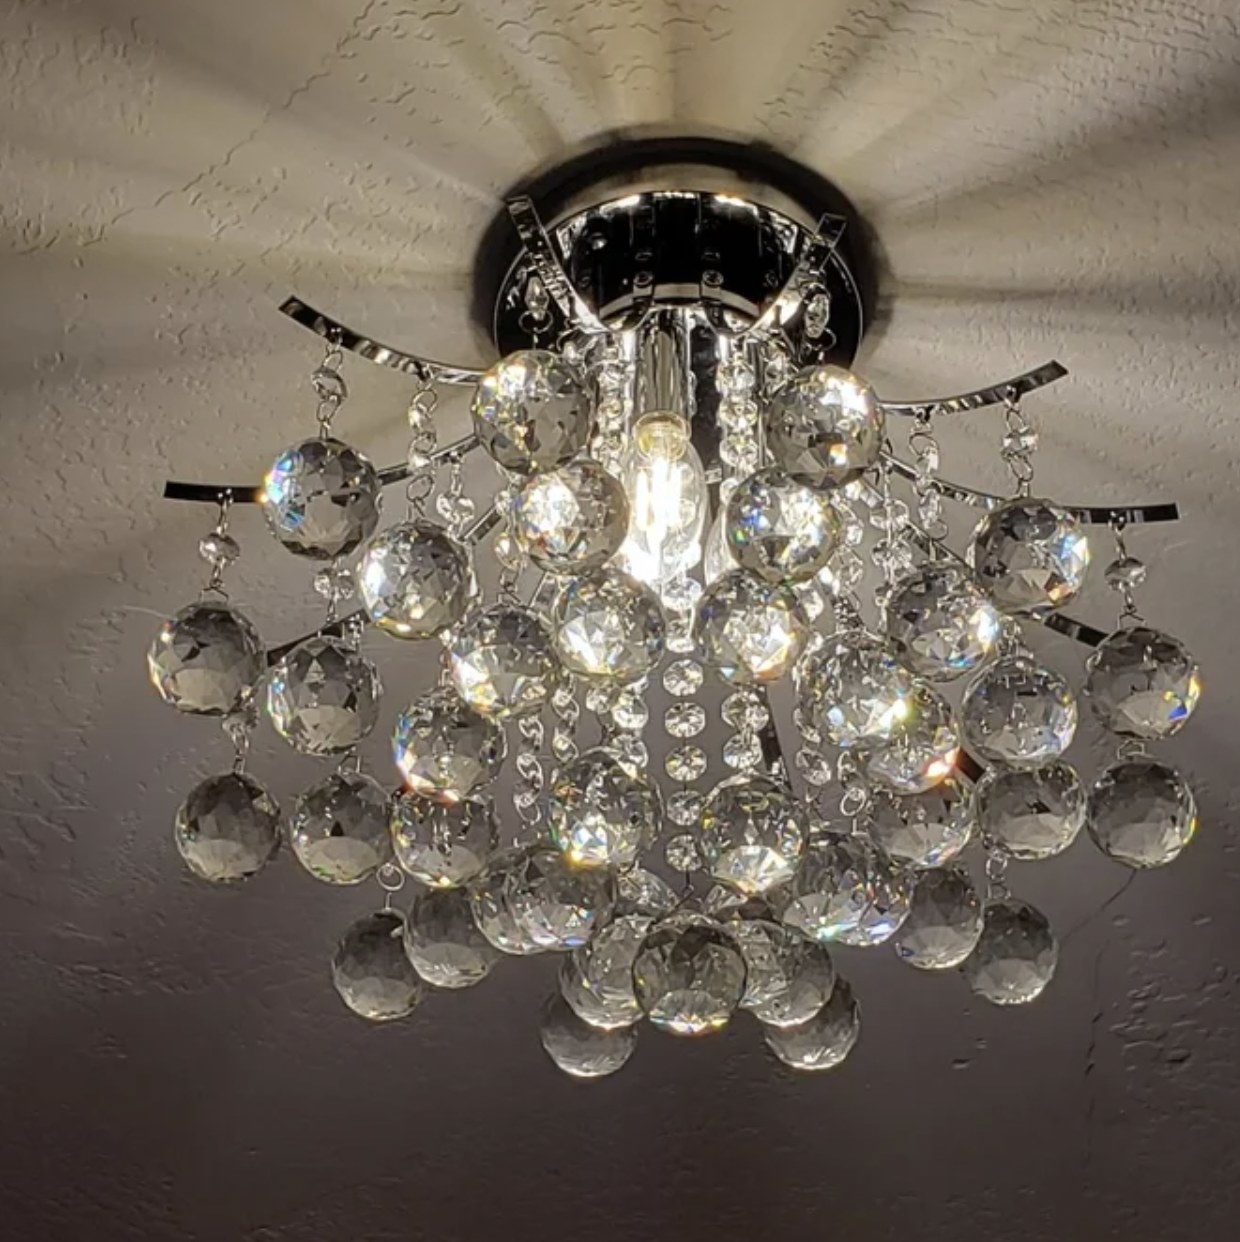 The three tiered chandelier with light on